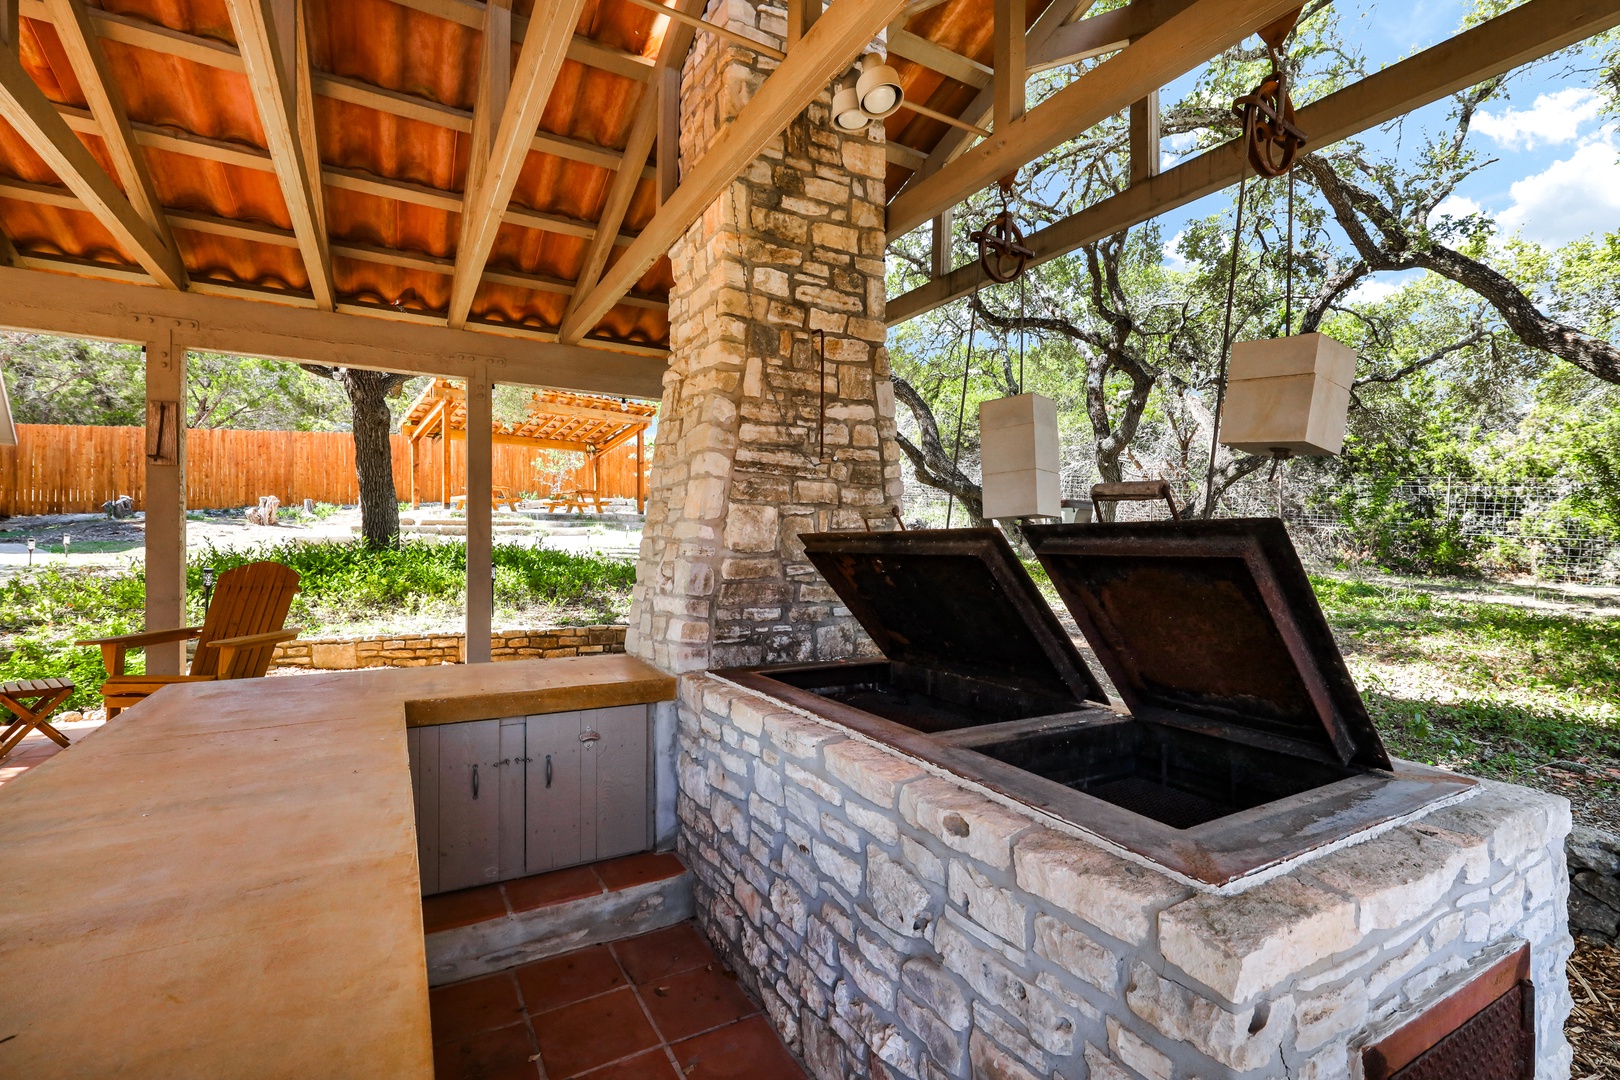 Grill-masters are sure to love the shaded outdoor kitchen